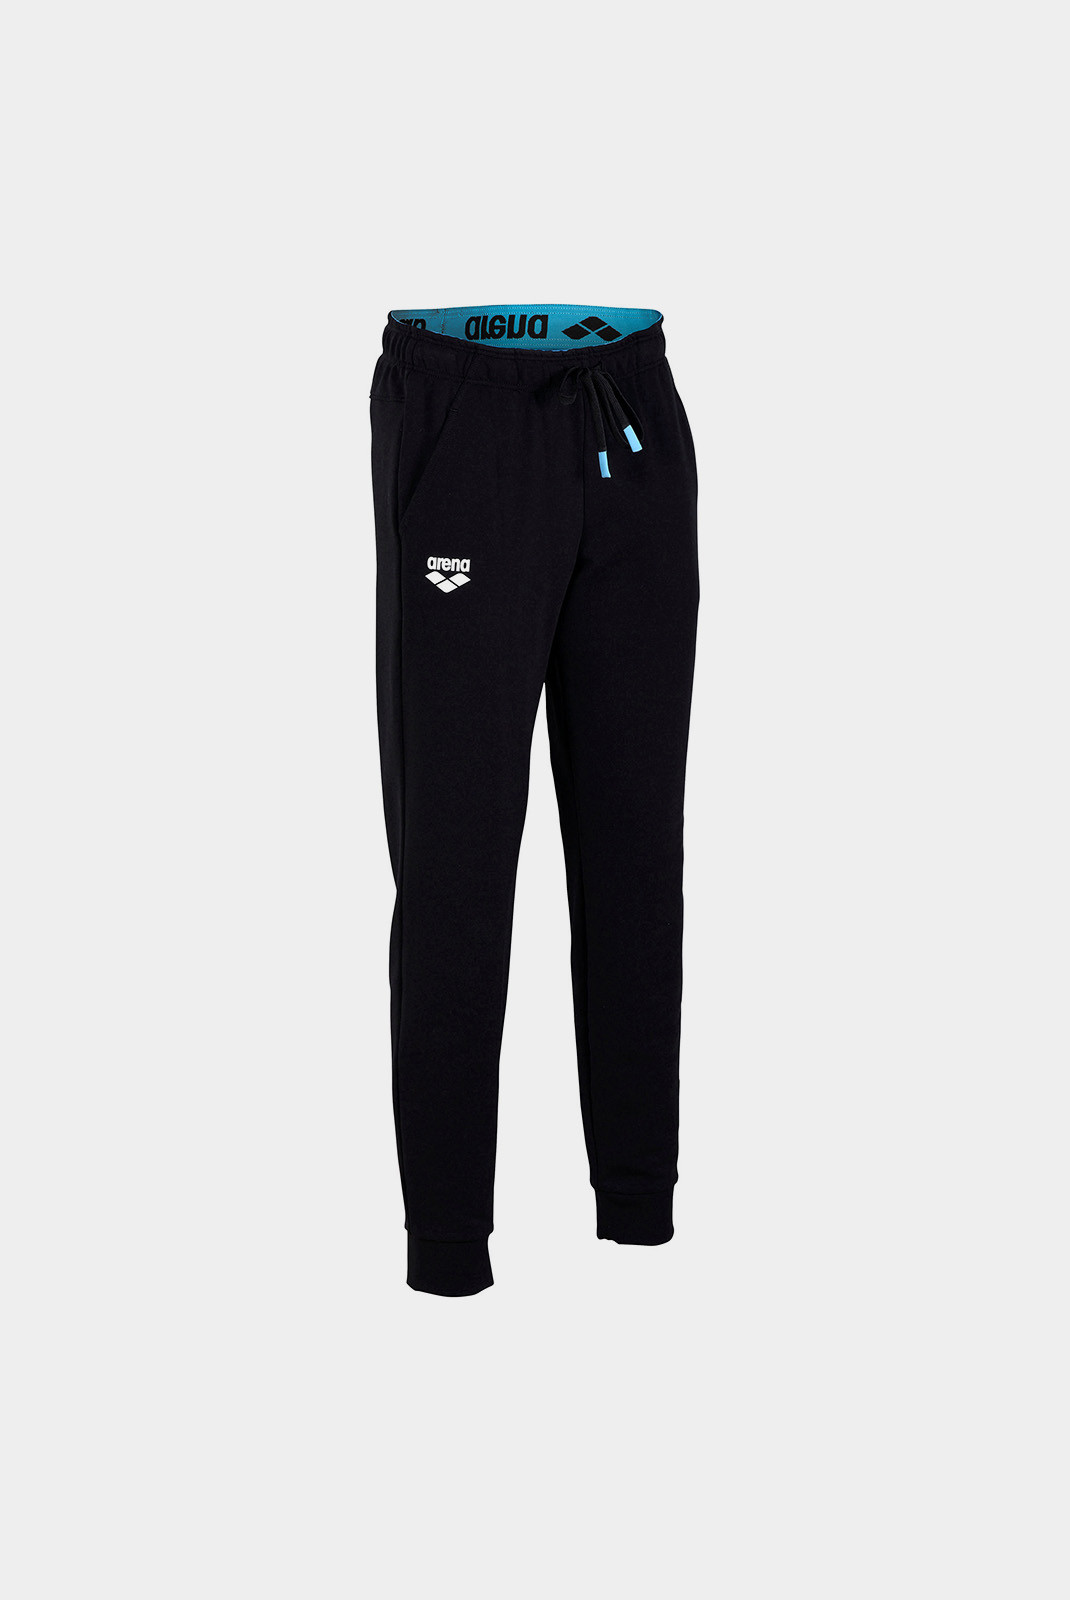 Штани Arena TEAM PANT SOLID 004898-500